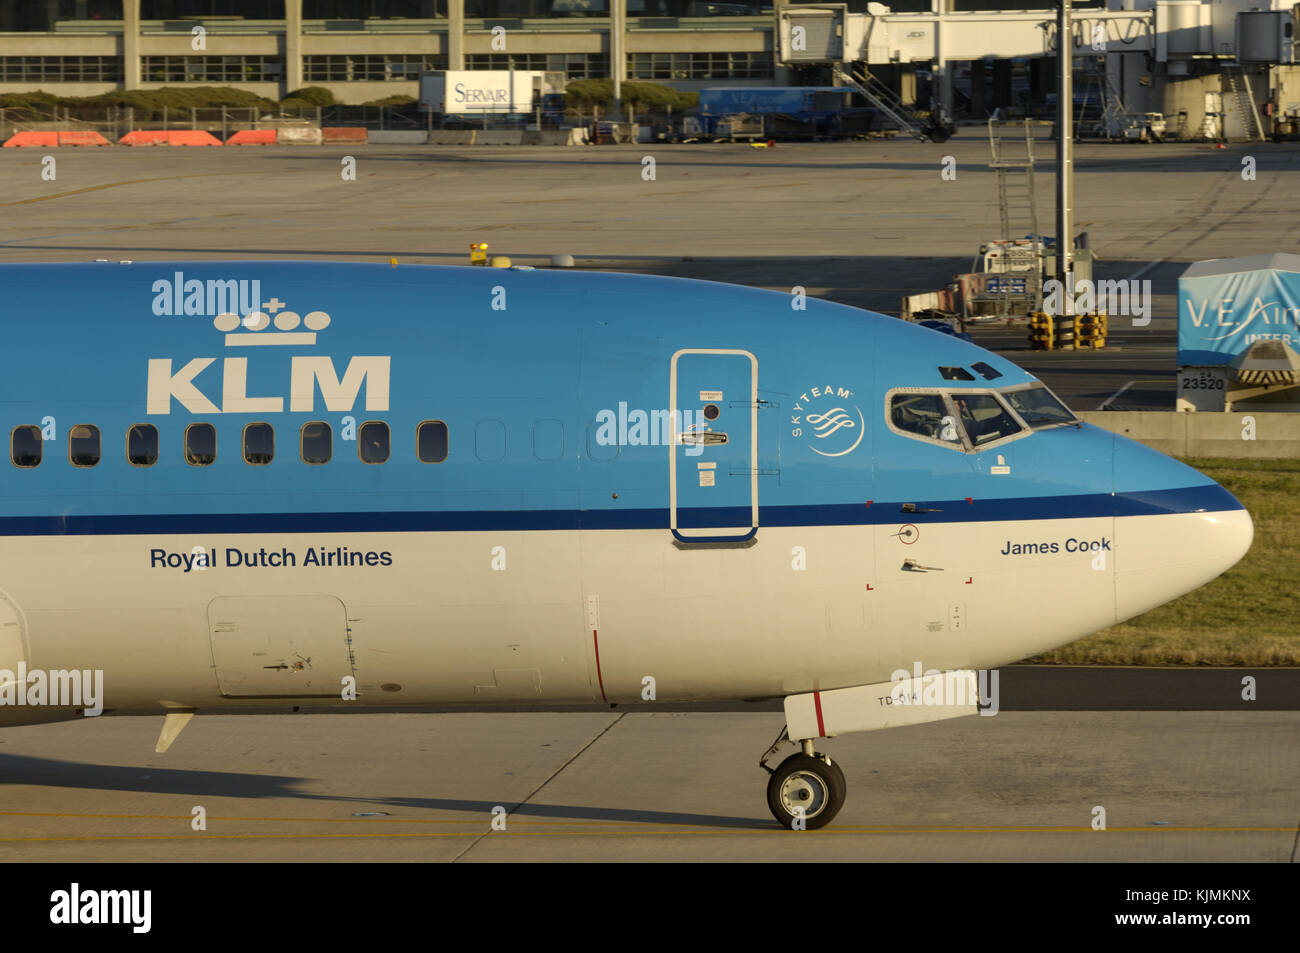 taxiing with Skyteam and KLM logos on the forward fuselage Stock Photo